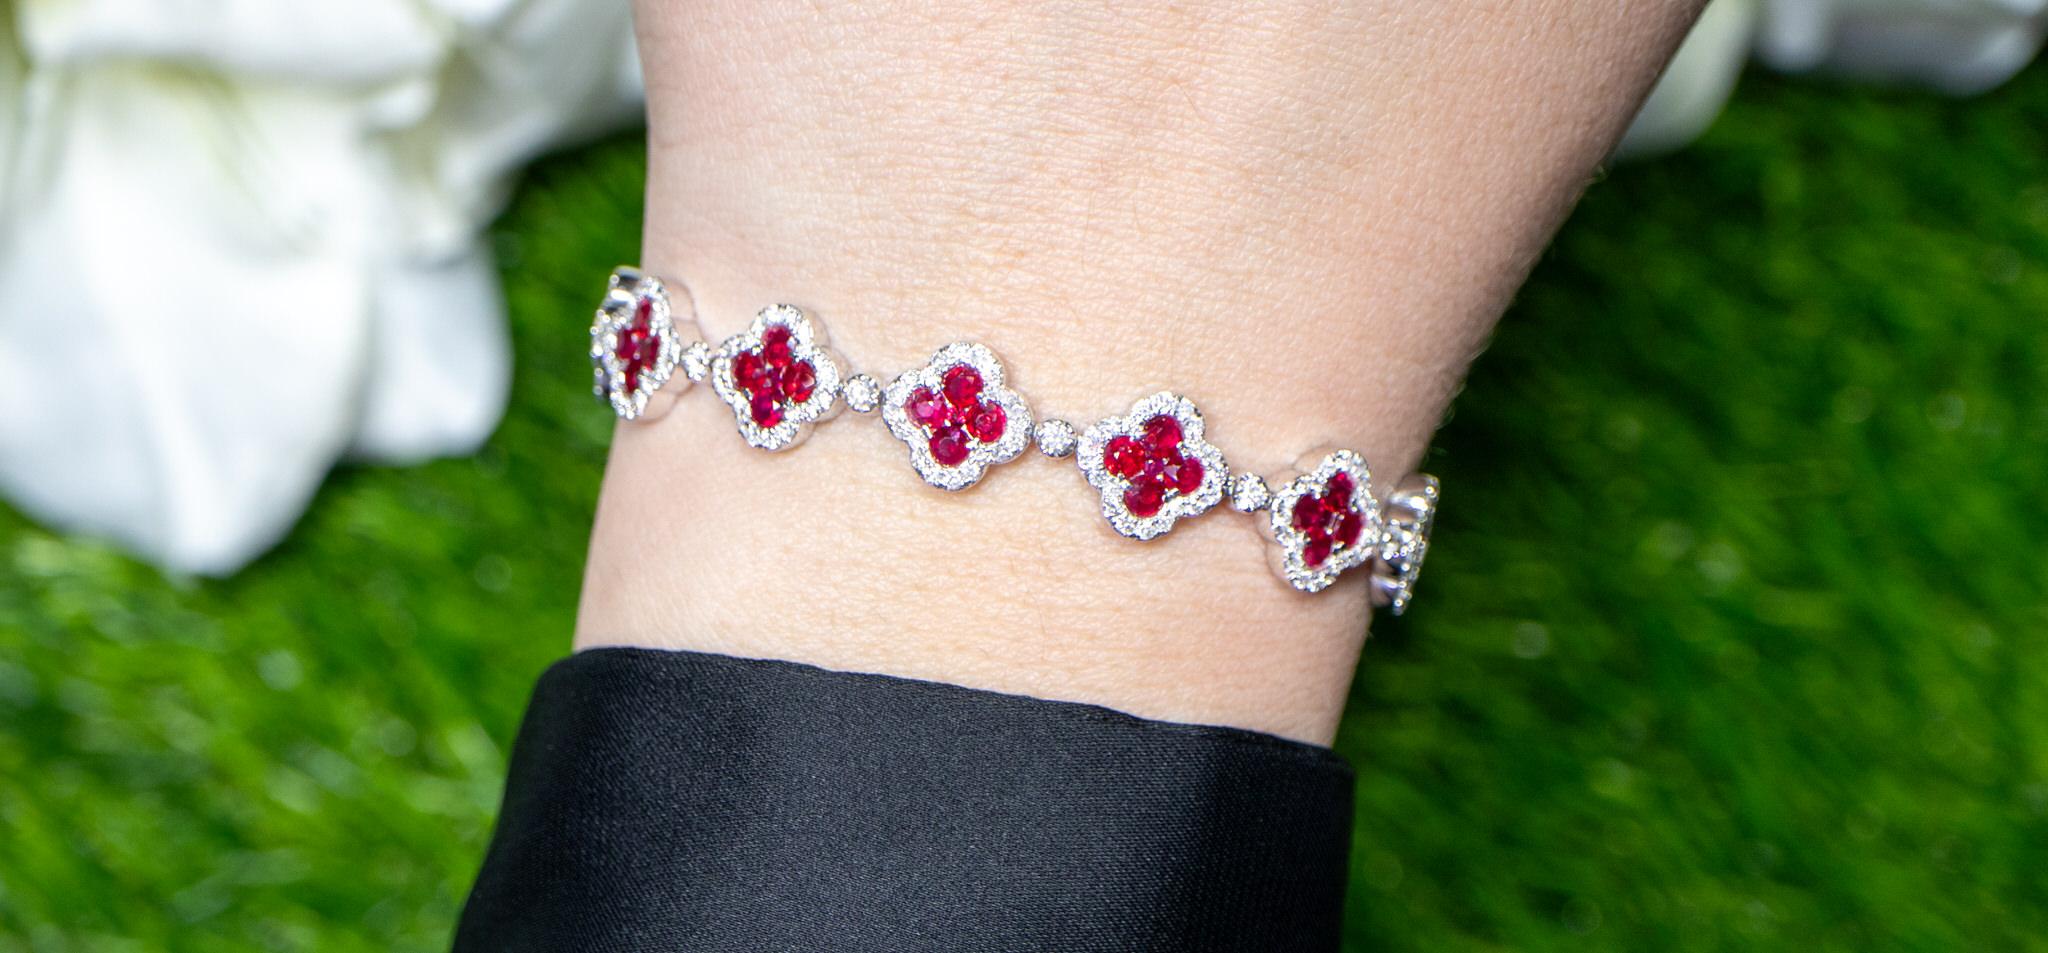 Clover Ruby Bracelet Diamond Links 8.5 Carats 18K White Gold In Excellent Condition For Sale In Laguna Niguel, CA